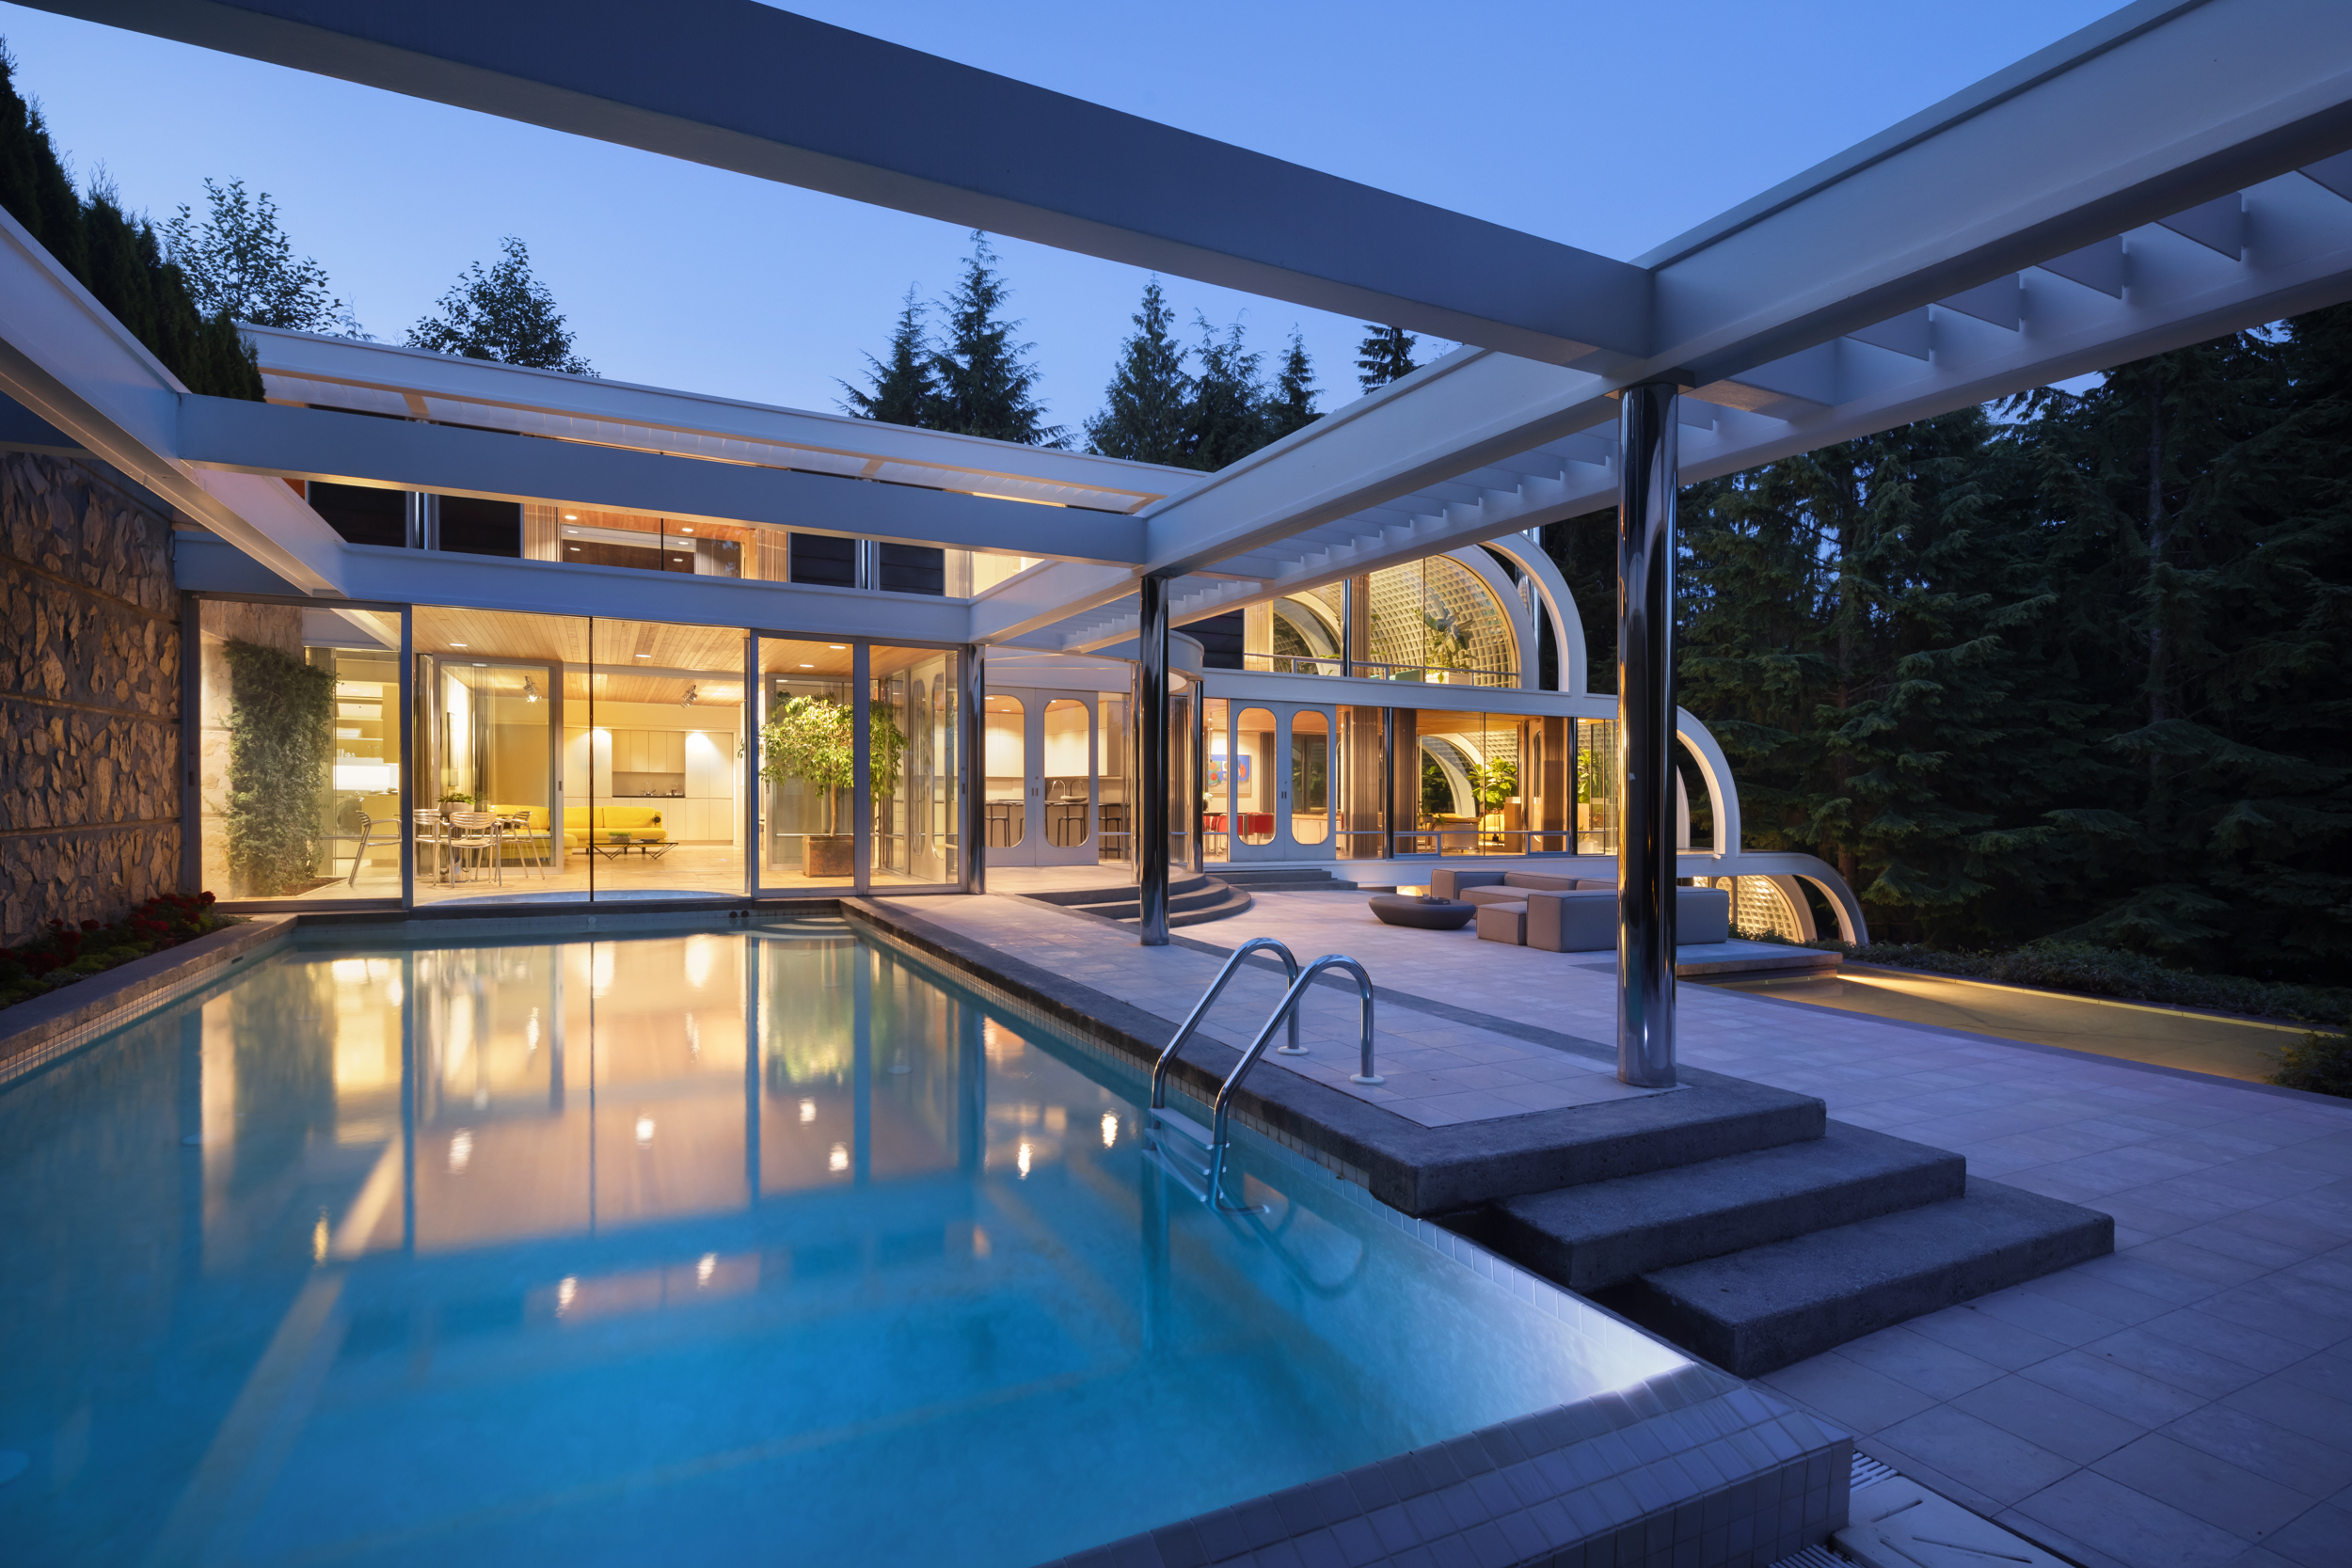 EPPICH HOUSE II – Iconic Arthur Erickson Home in the British Properties